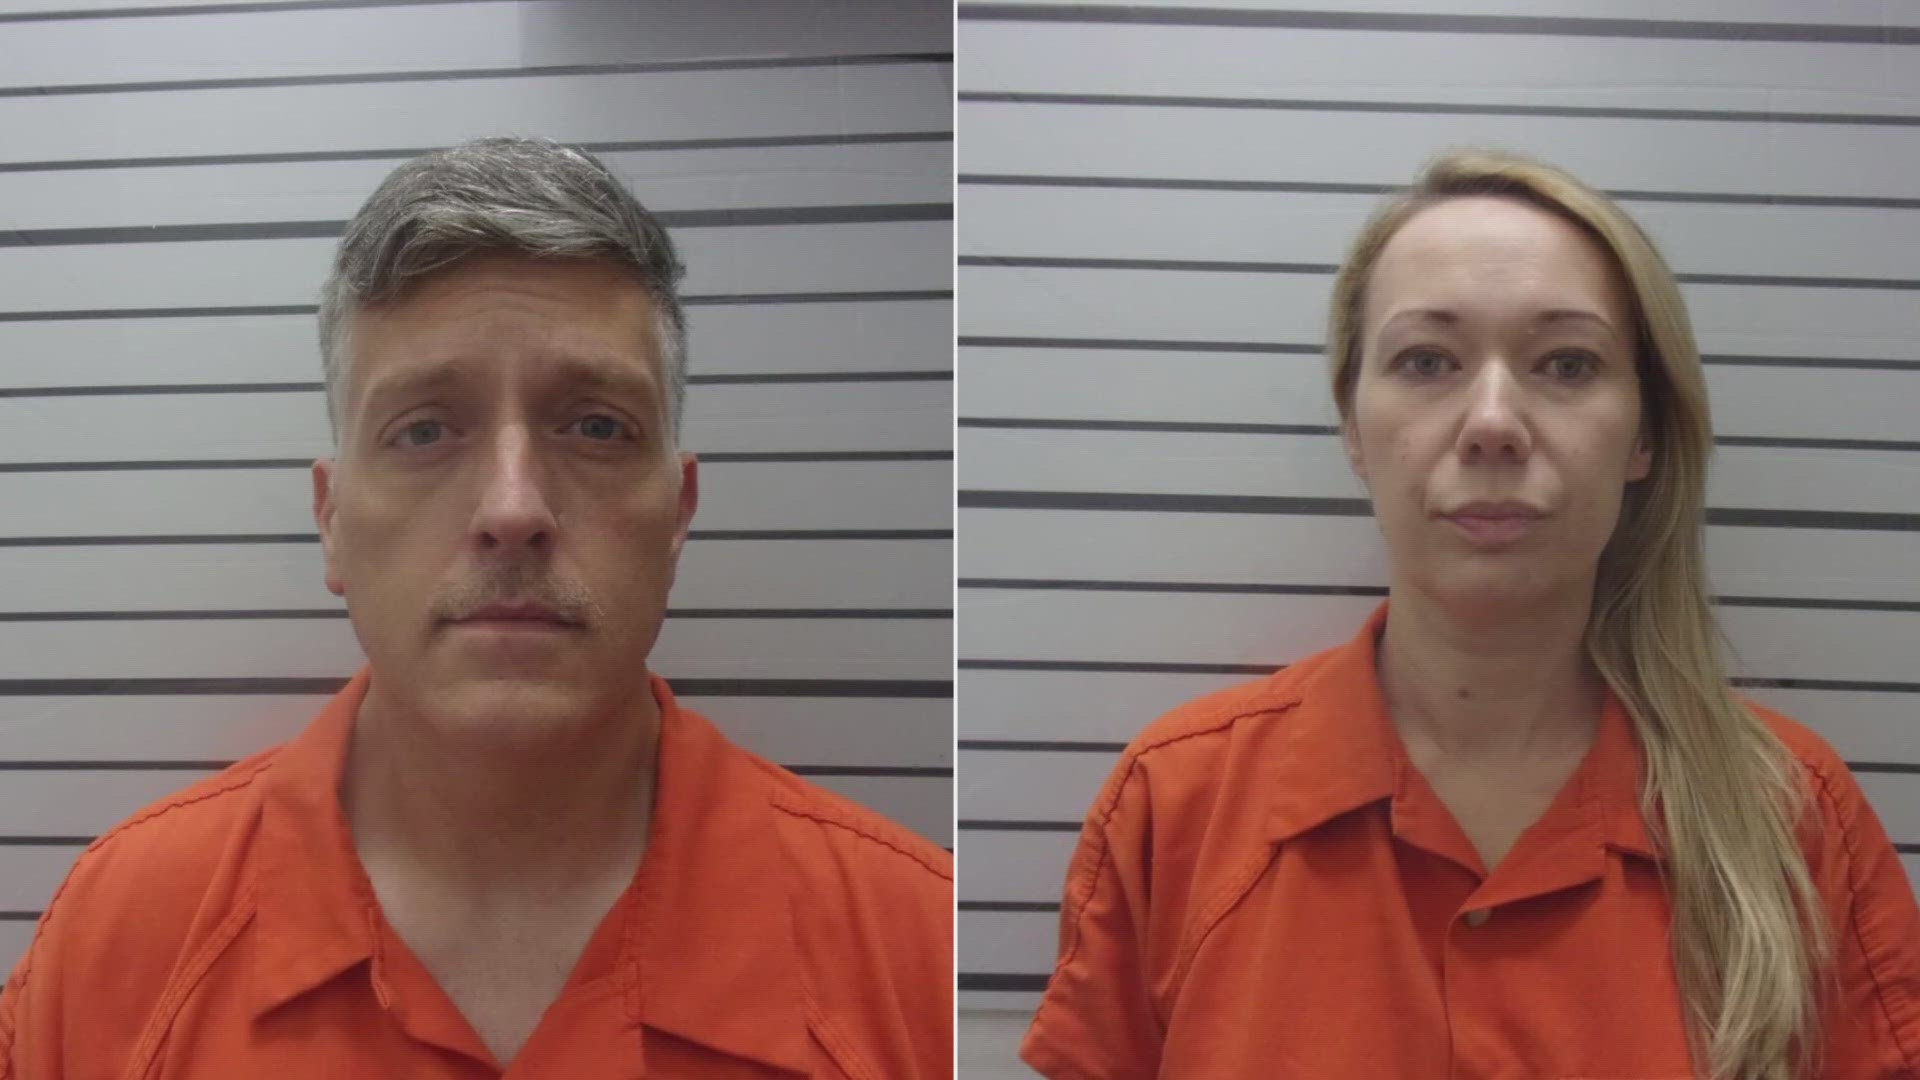 Police arrested Return to Nature Funeral Home owners Jon and Carrie Hallford this month after investigators found nearly 200 decomposing bodies in the building.